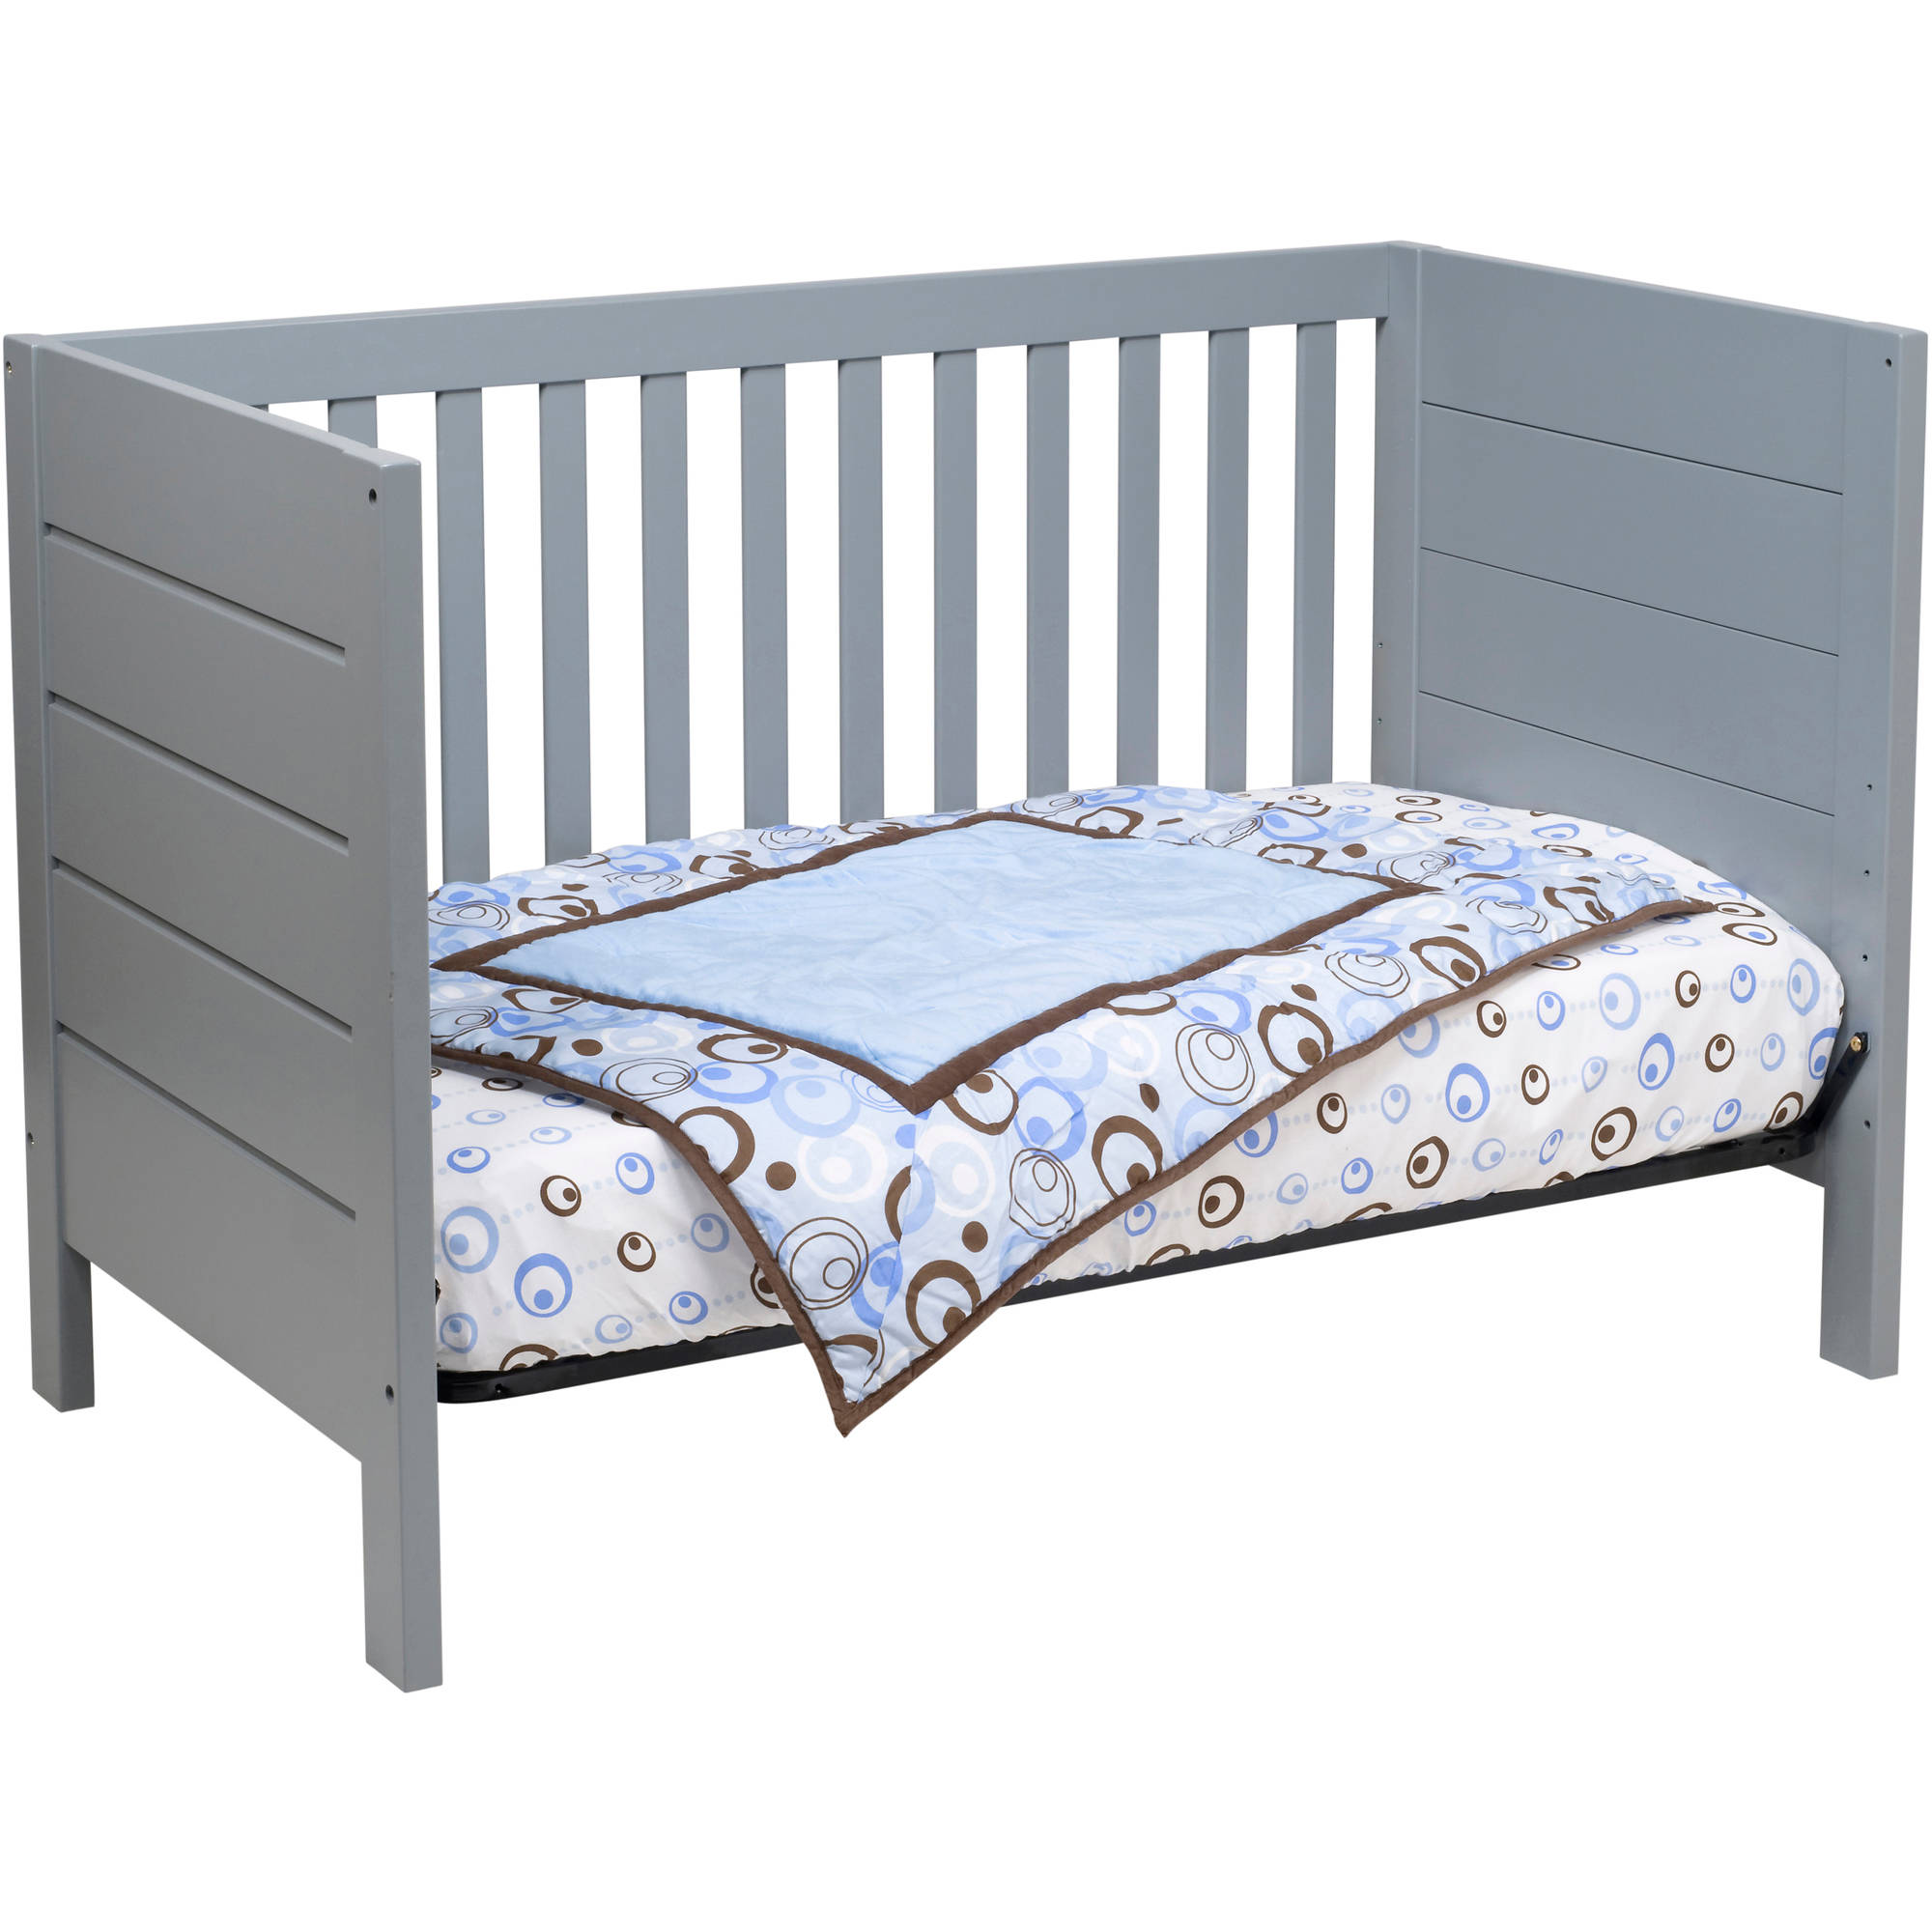 Baby Mod Modena 3-in-1 Convertible Crib Gray - image 3 of 9